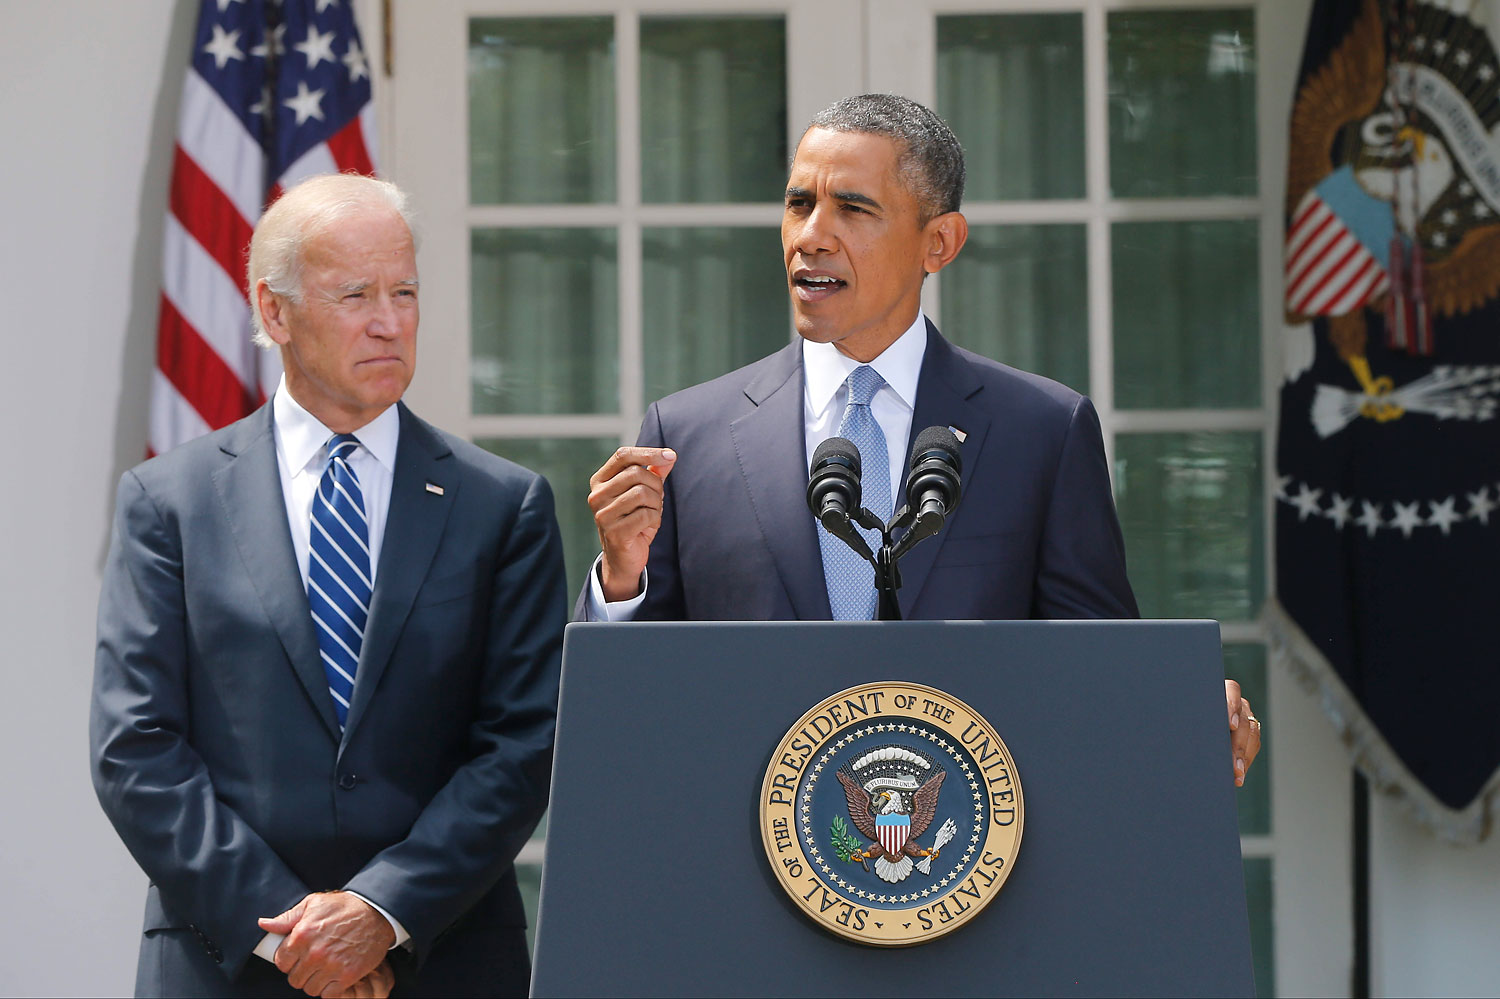 President Barack Obama stands with Vice President Joe Biden as he makes a statement about Syria in the Rose Garden at the White House in Washington Aug. 31, 2013.